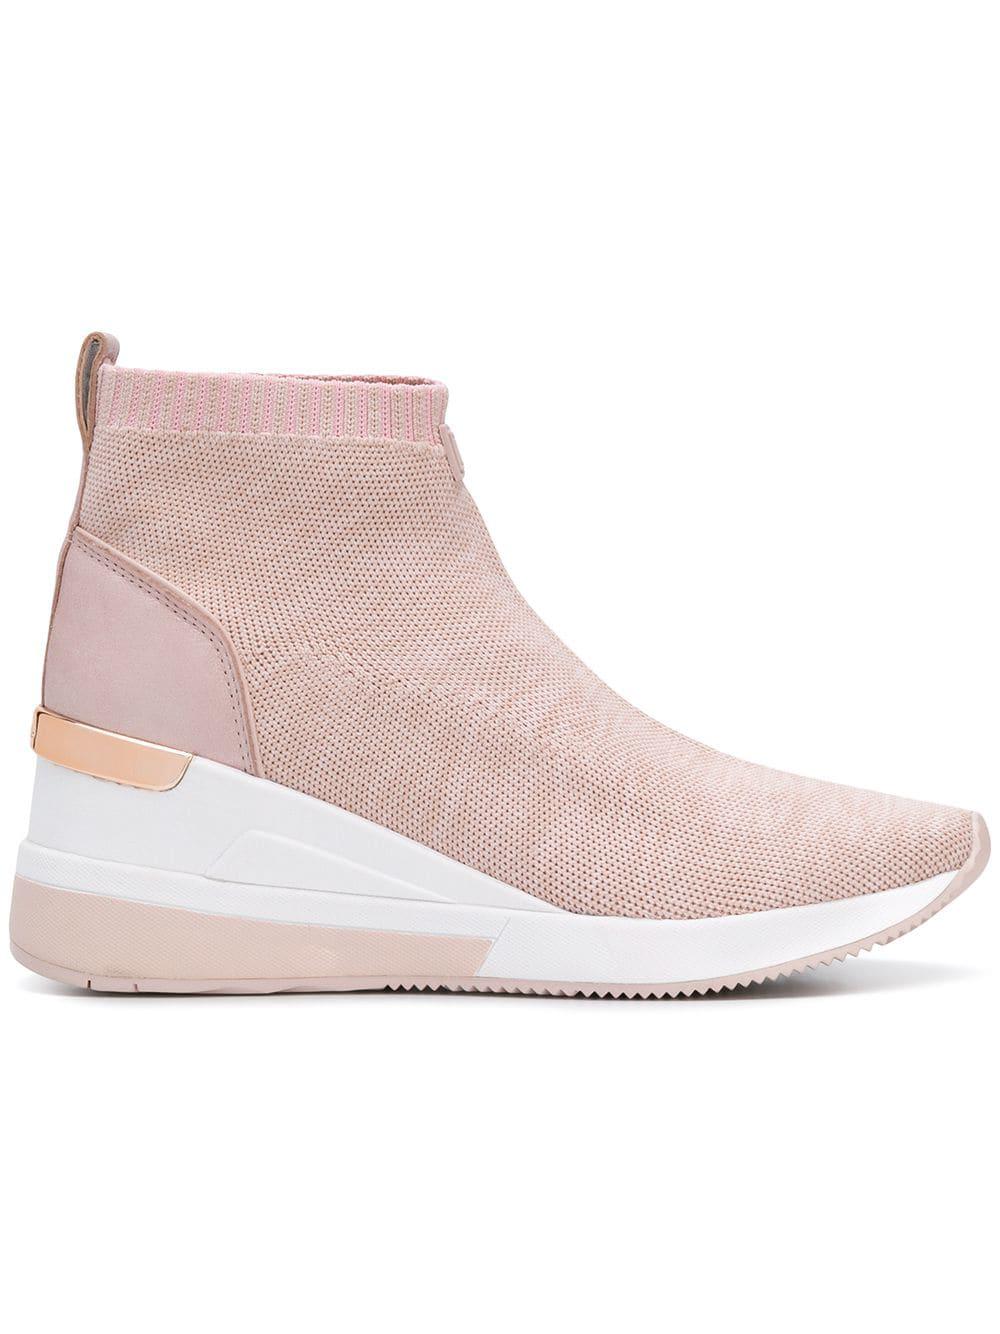 MICHAEL Michael Kors Rubber Boots in Pink - Lyst